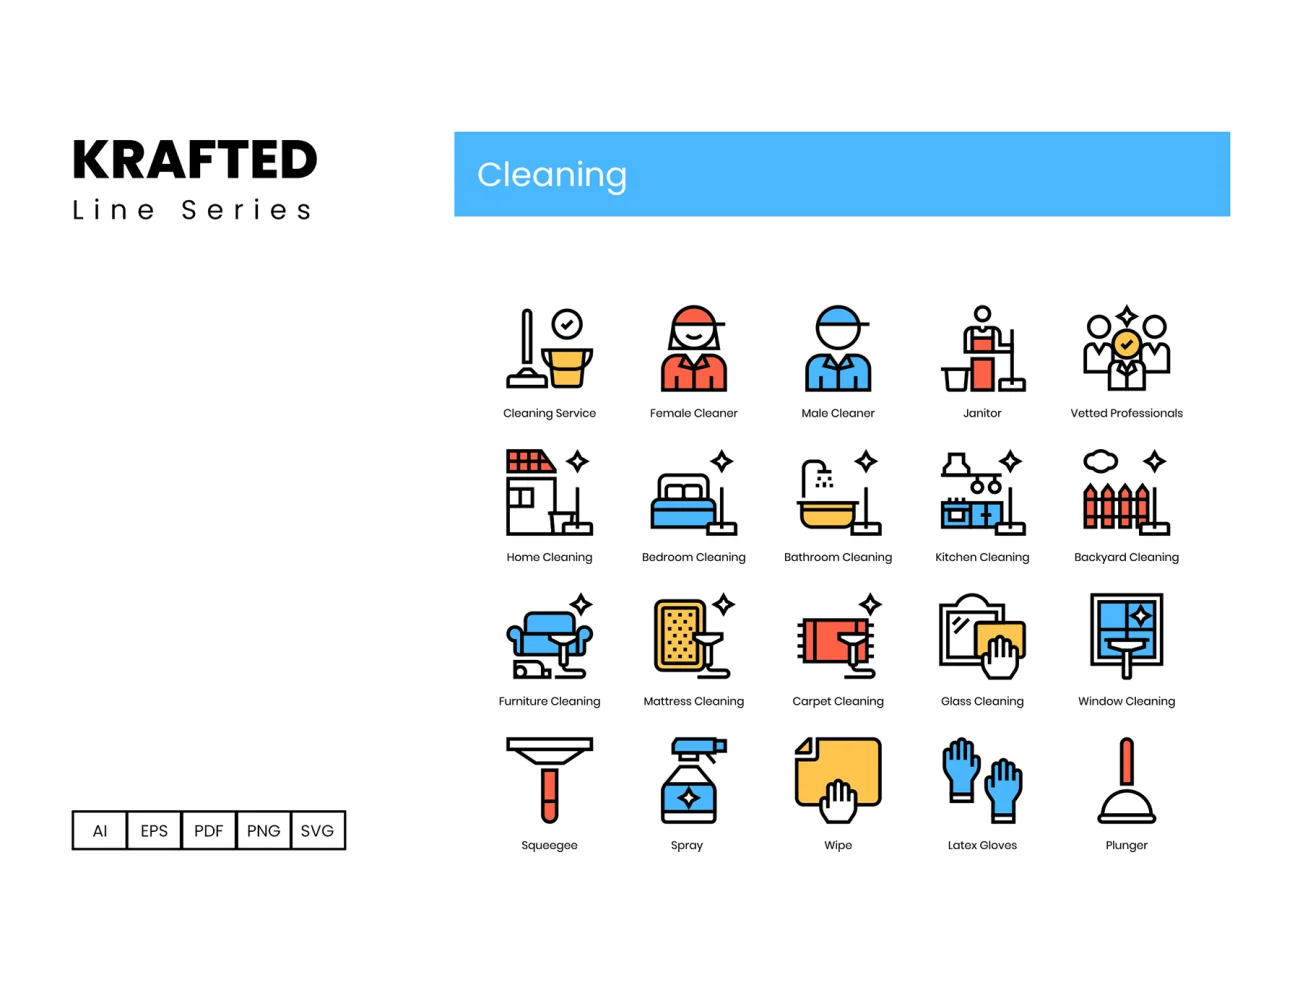 60 Cleaning Icons Krafted Line Series 60个清洁图标牛皮纸生产线系列-3D/图标-到位啦UI